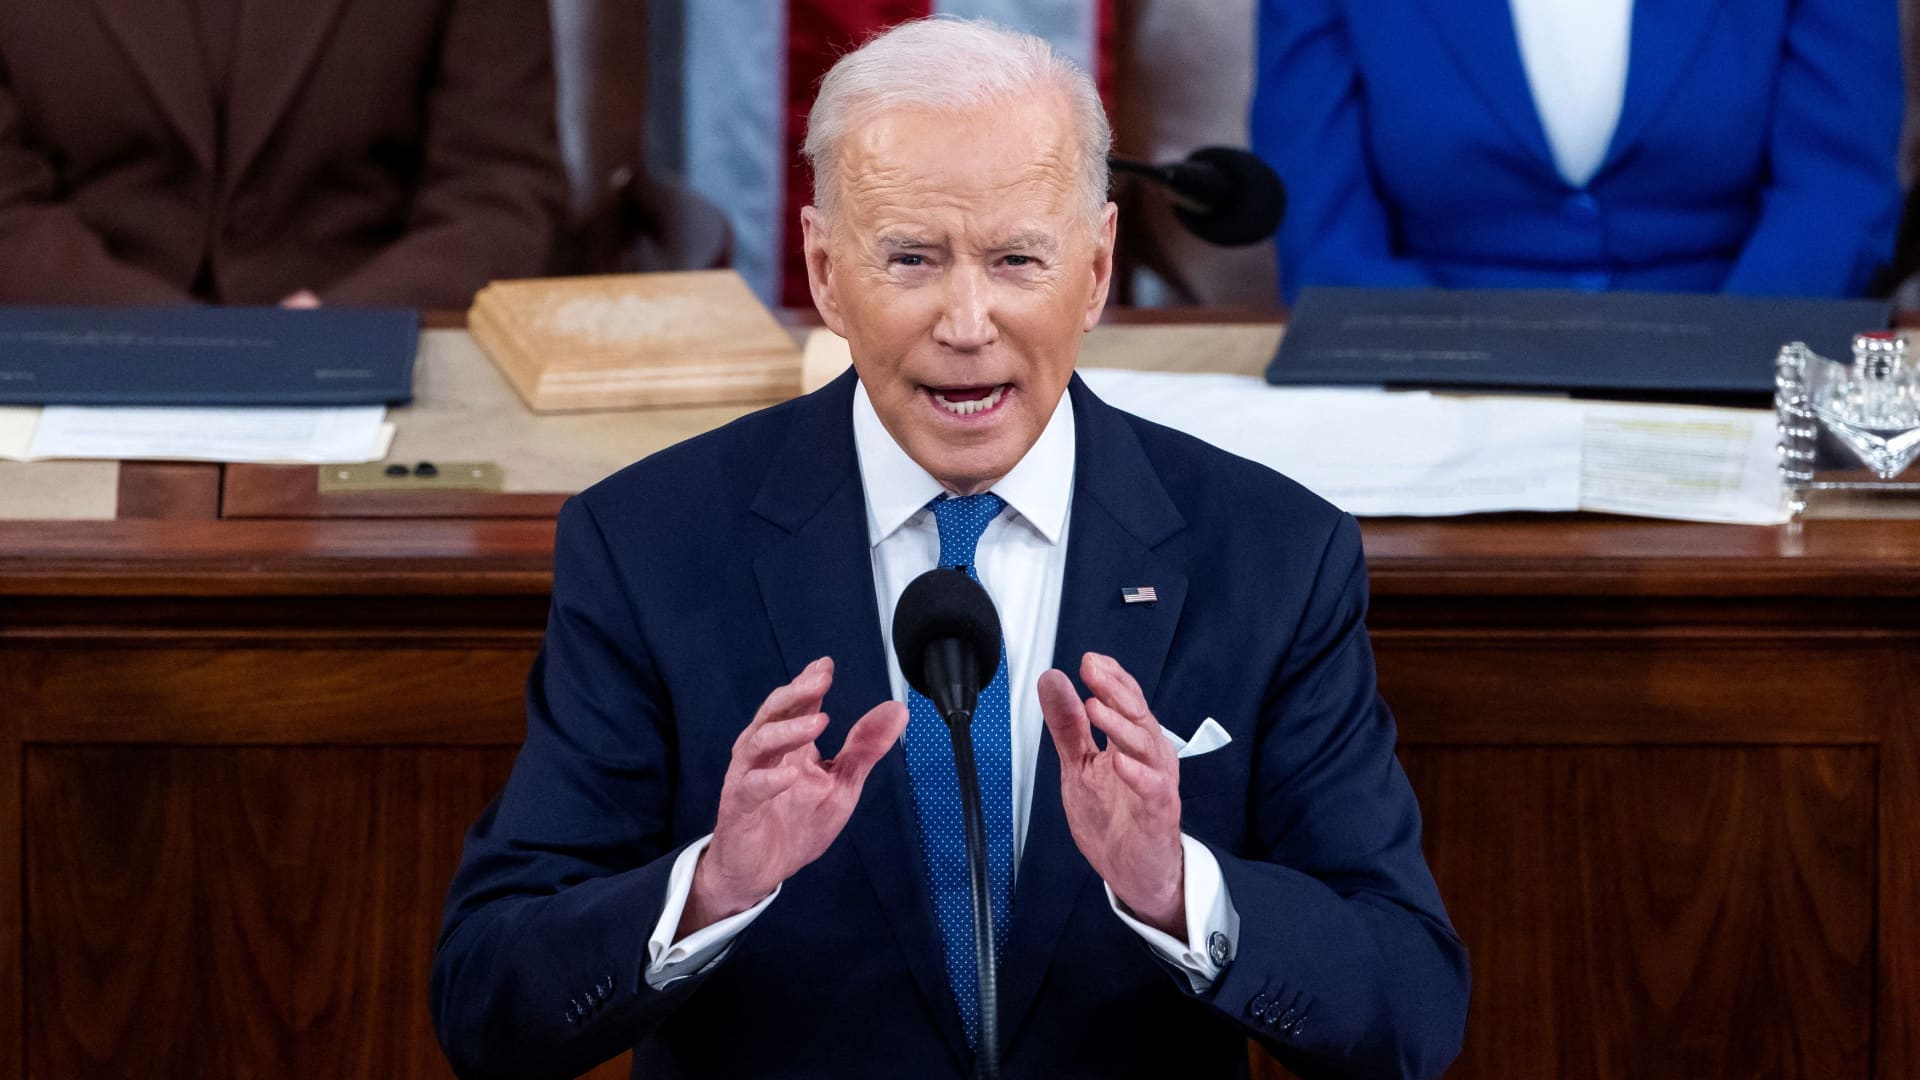 US President Joe Biden delivers his State of the Union Address before lawmakers in the US Capitol in Washington, DC, U.S., March 1, 2022.